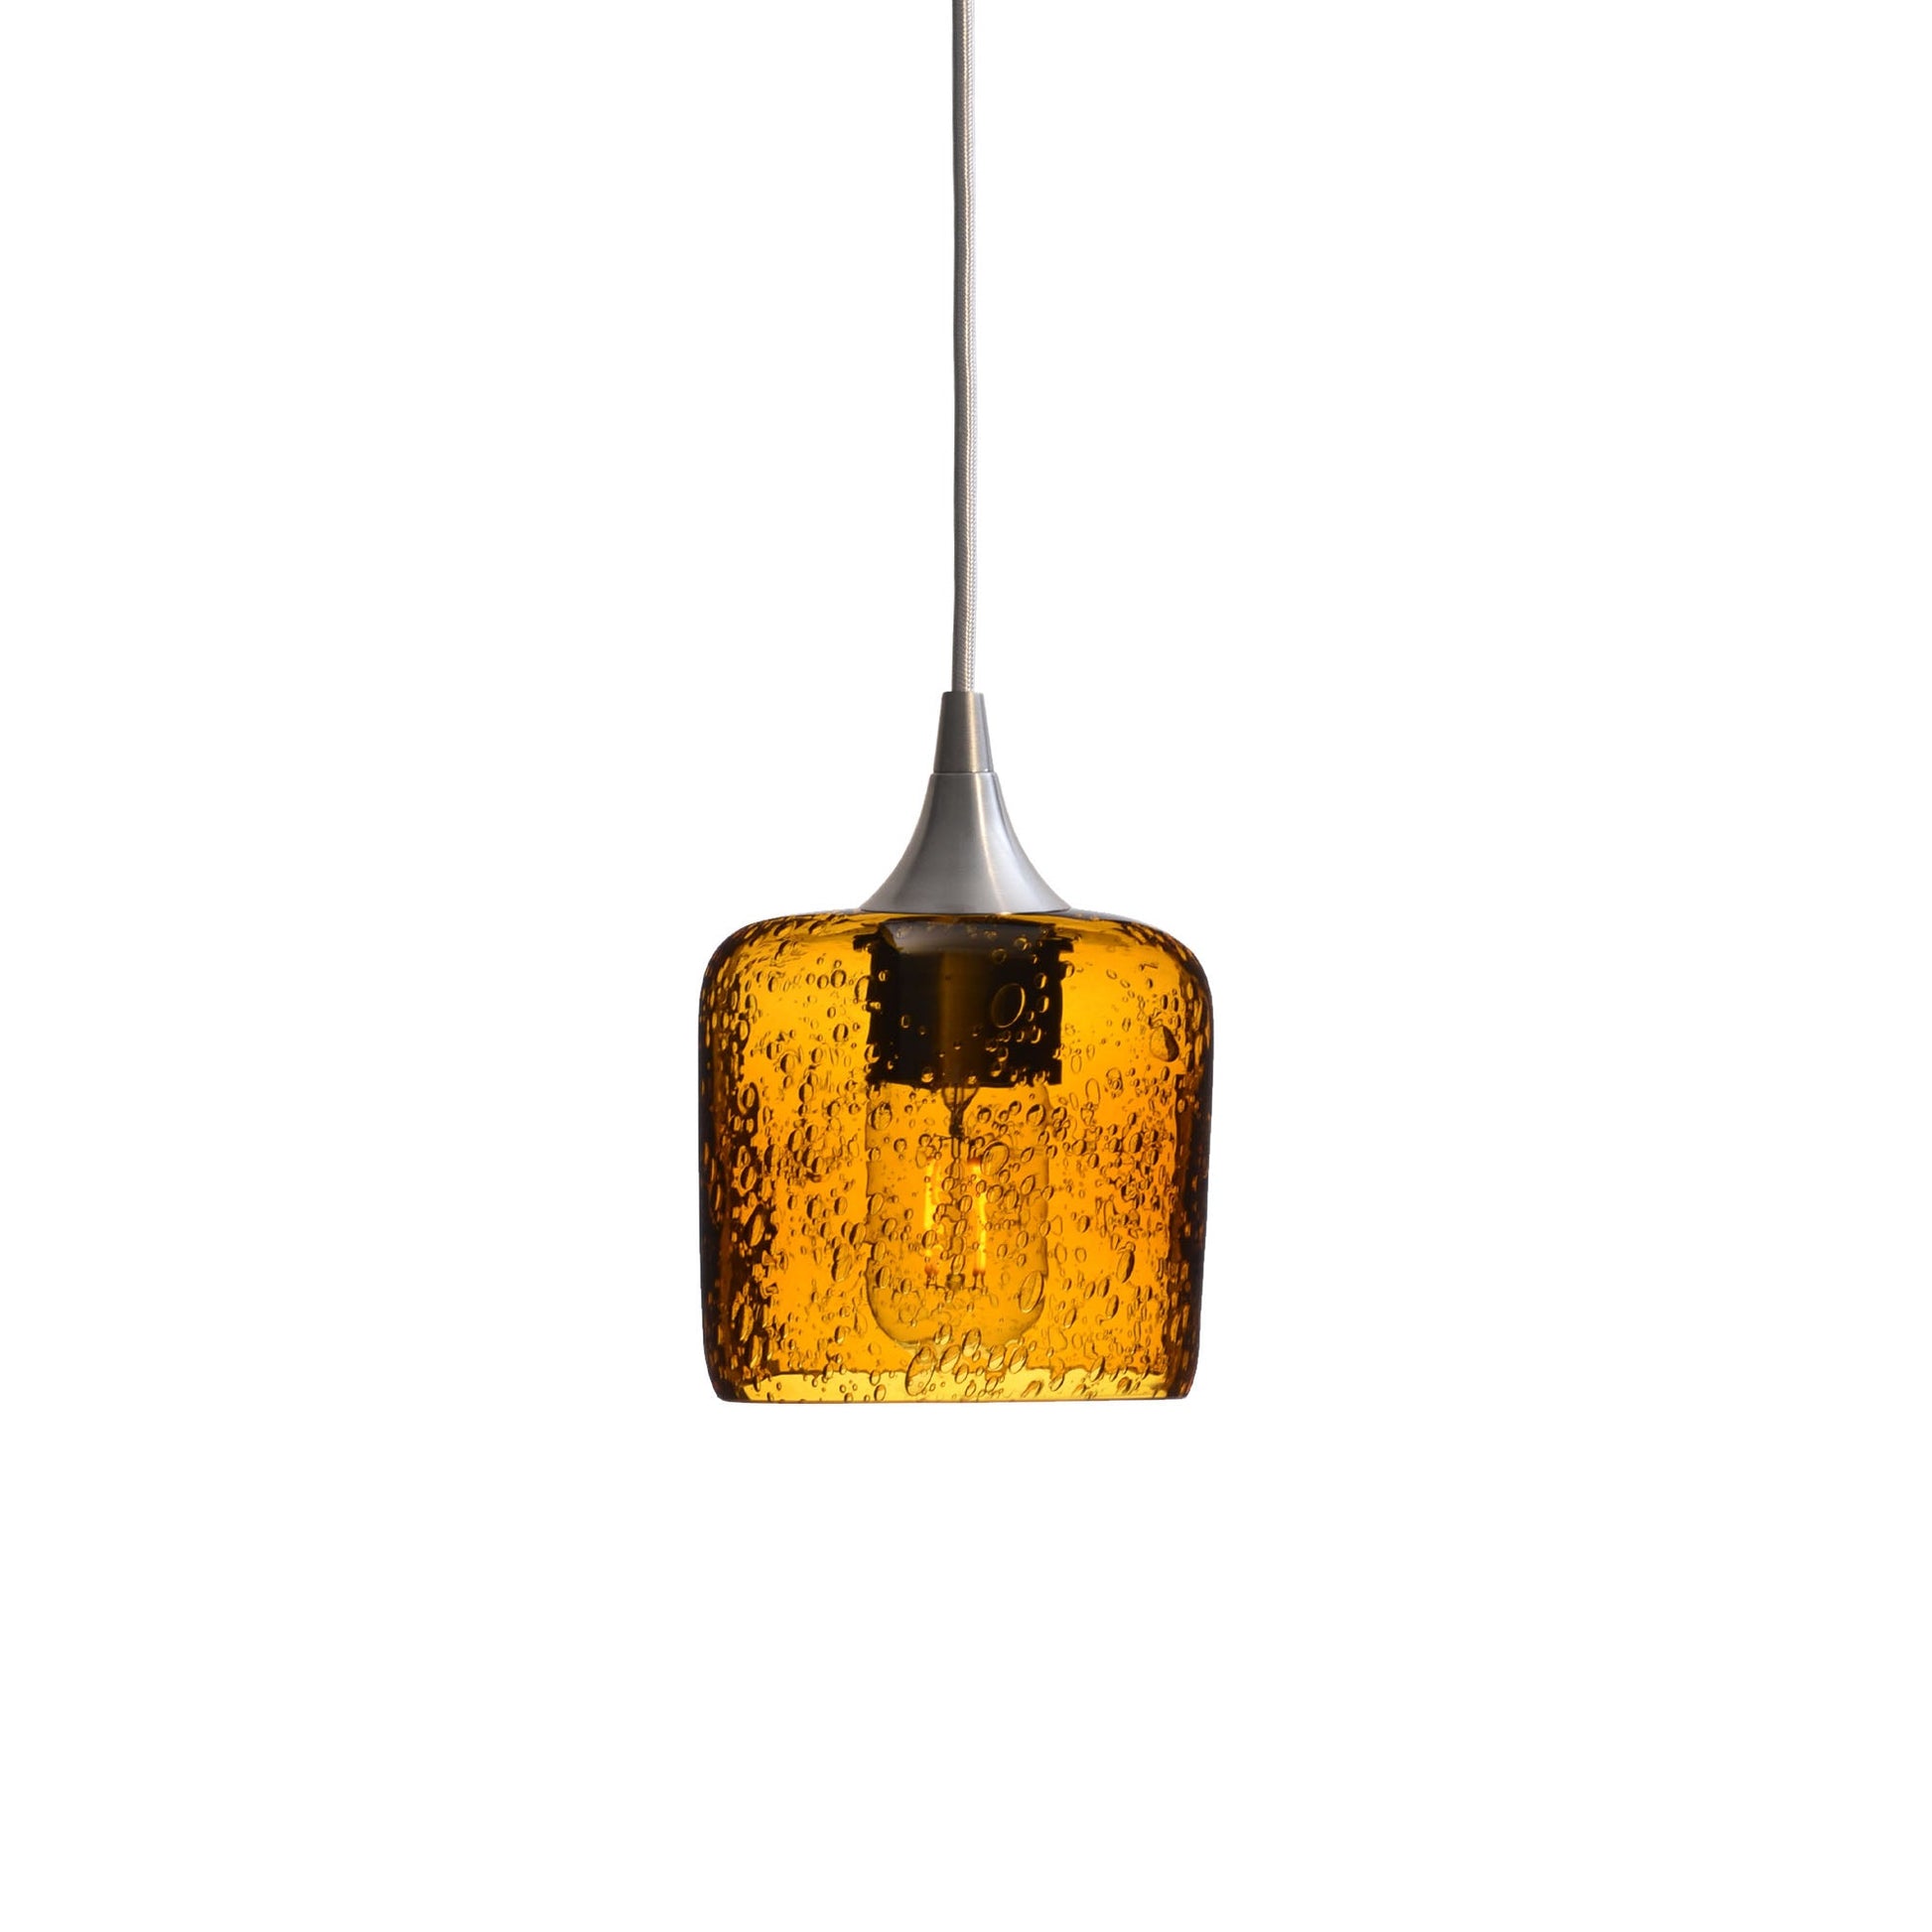 601 Lunar: Single Pendant Light-Glass-Bicycle Glass Co - Hotshop-Harvest Gold-Brushed Nickel-Bicycle Glass Co